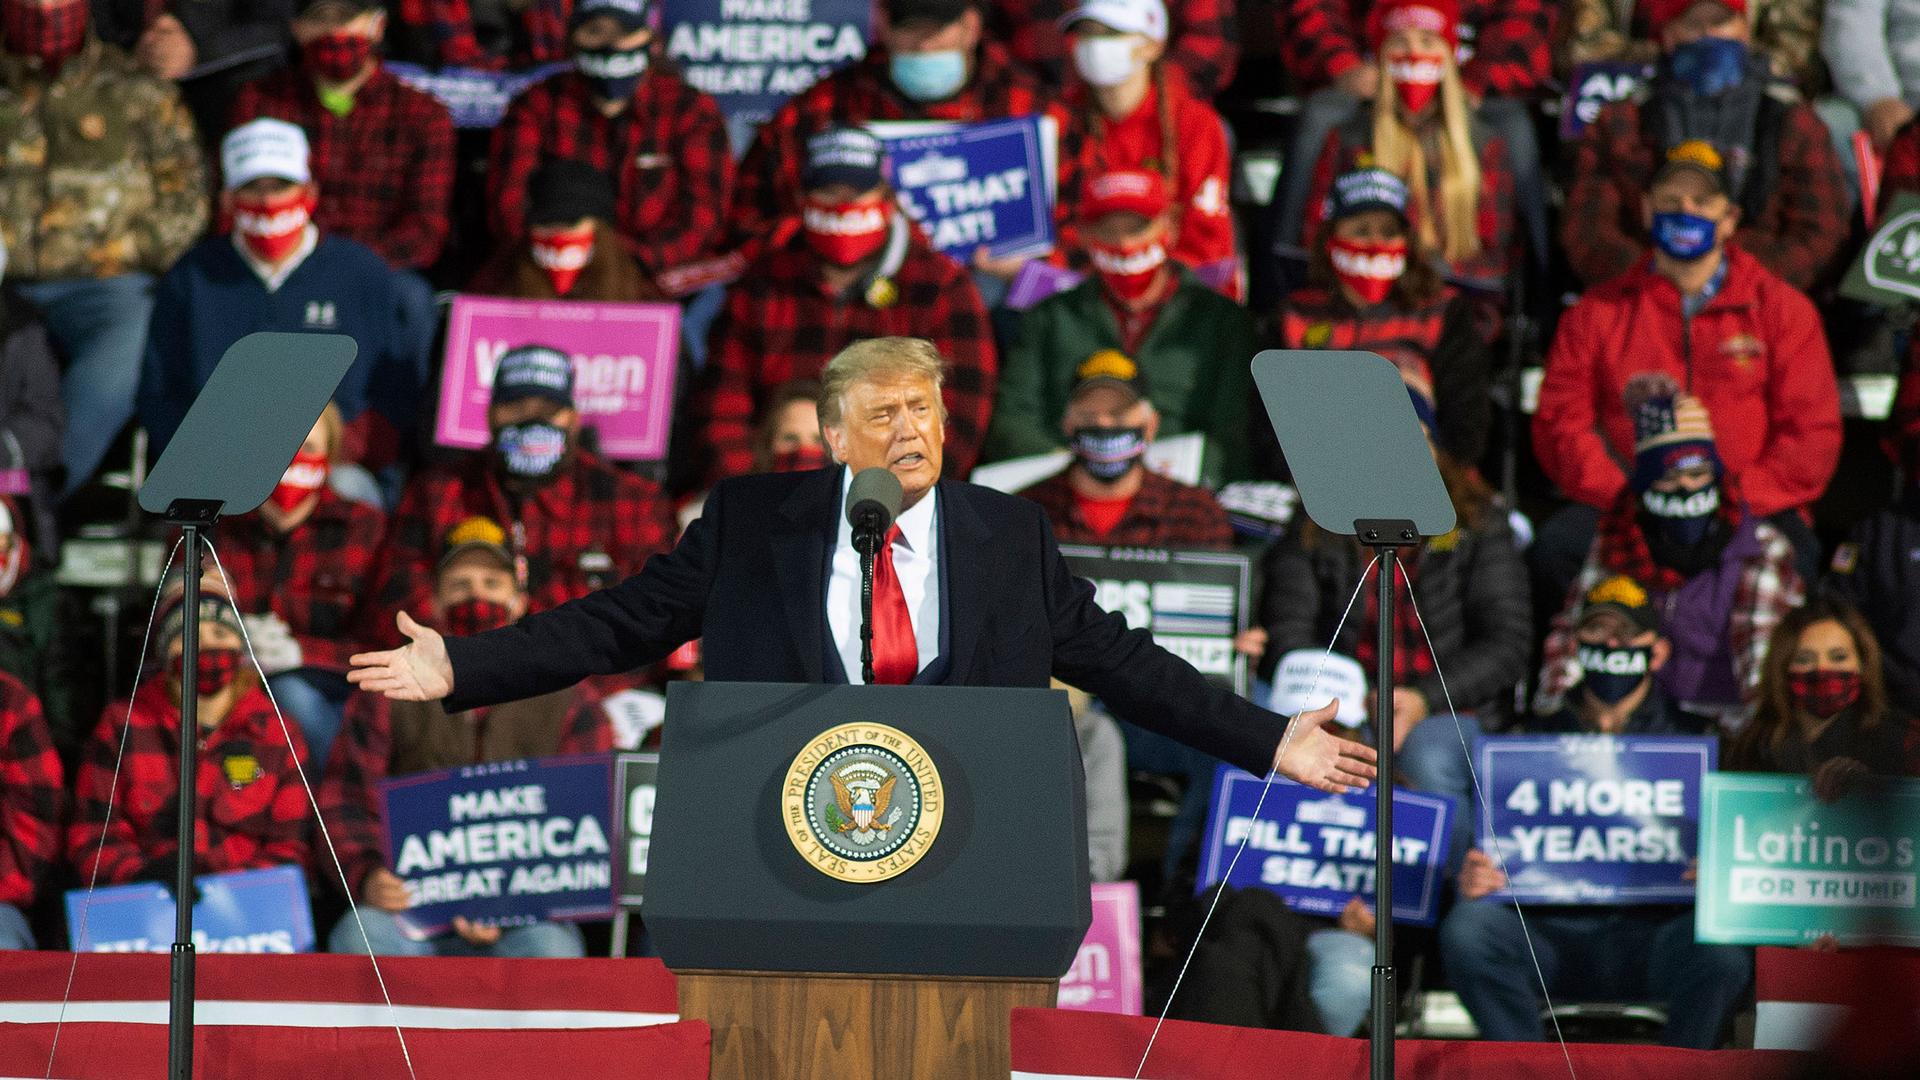 US President Donald Trump is shown with his arms outstretched, speaking at a podium with a crowd of people behind him.